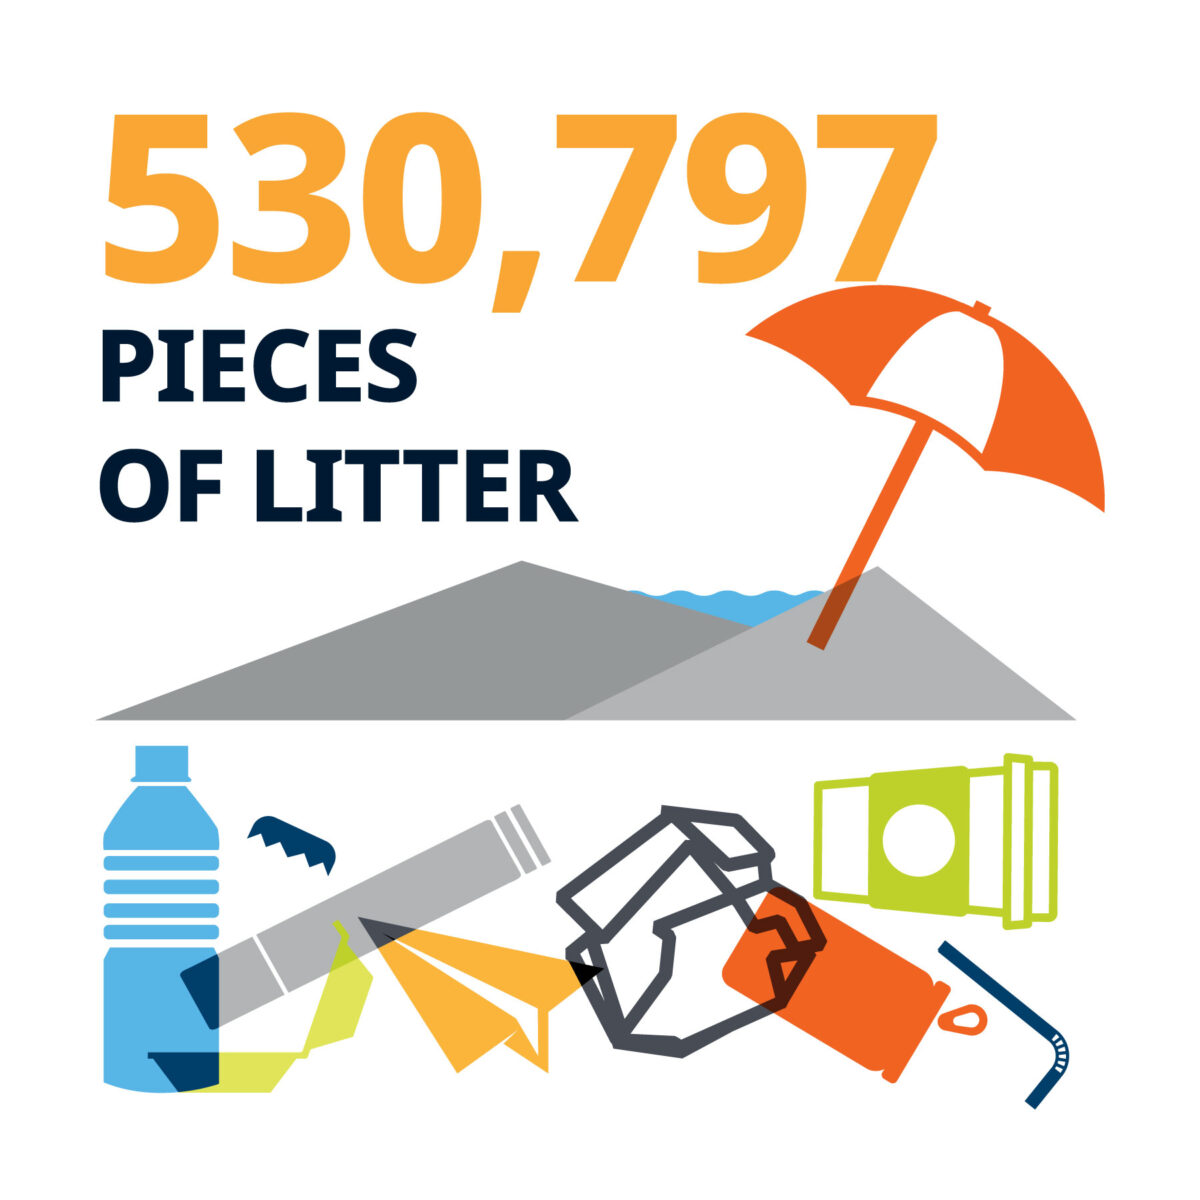 530,797 pieces of litter.